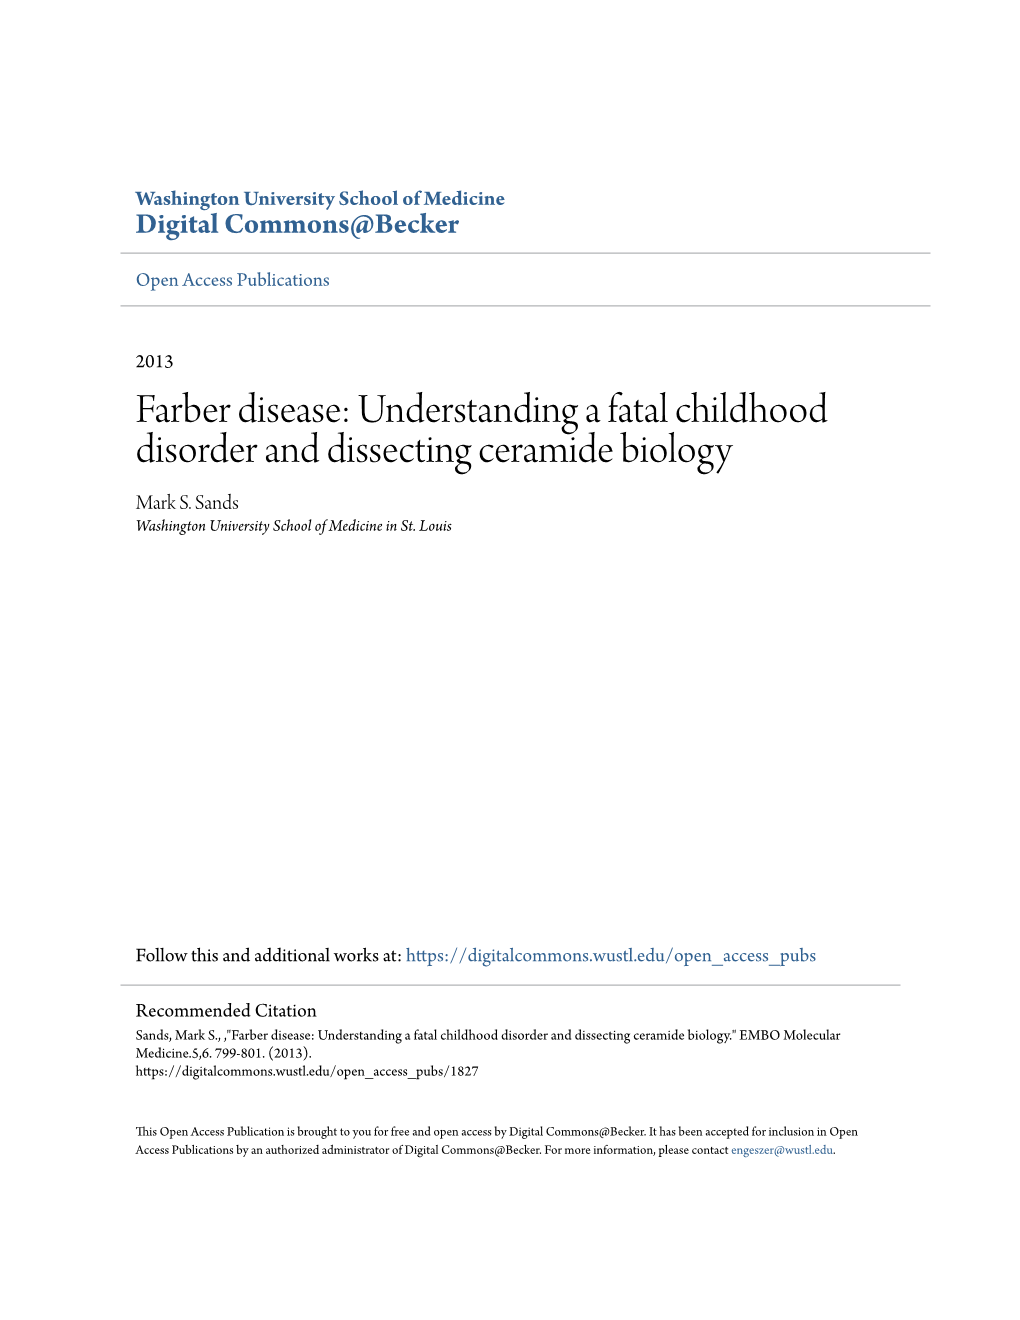 Farber Disease: Understanding a Fatal Childhood Disorder and Dissecting Ceramide Biology Mark S